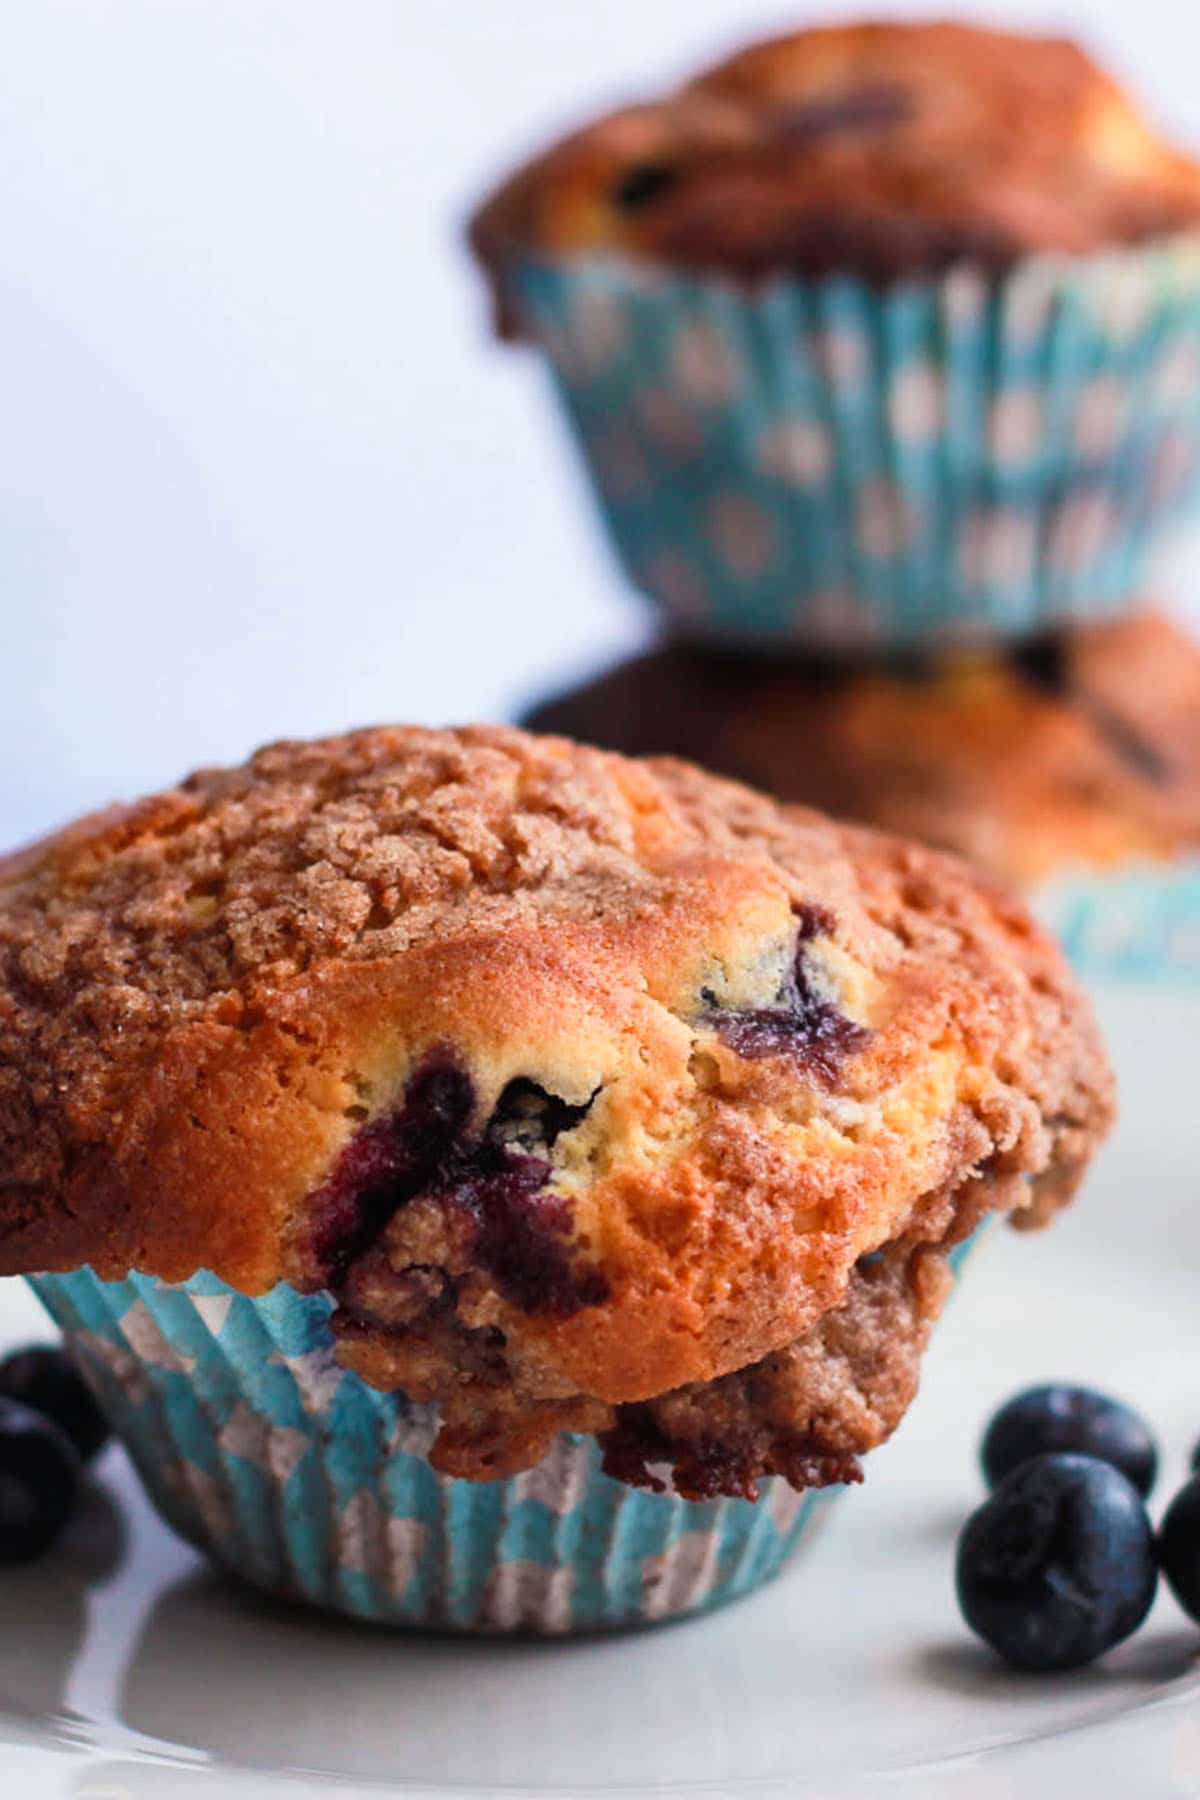 A Blueberry Crumb Cake Muffin on a plate with some fresh blueberries